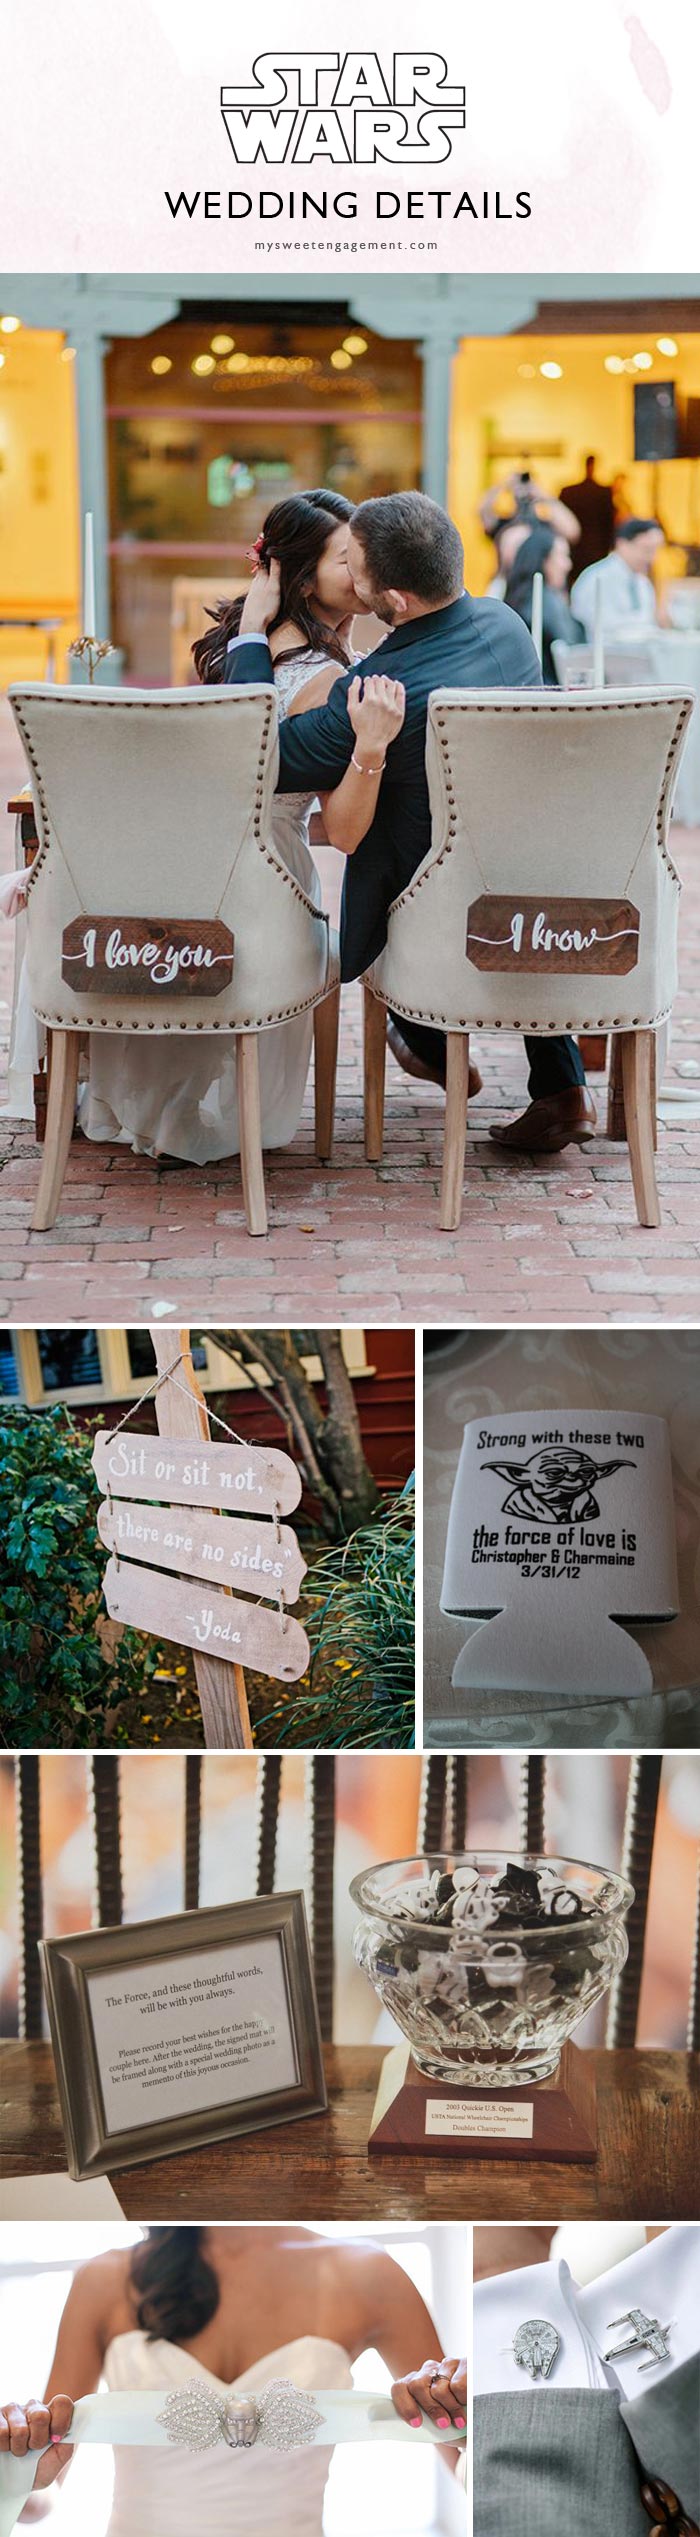 "I Love you. I know." Bride and Groom chair signs, other chair sign couple ideas: Princess + Jedi, Leia + Han. :) Wedding seating sign by Master Yoda. Star Wars wedding favors, guest book, bride and groom accessory details. // You're gonna love this Ultimate Guide for an Epic and Elegant Star Wars Wedding. // http://mysweetengagement.com